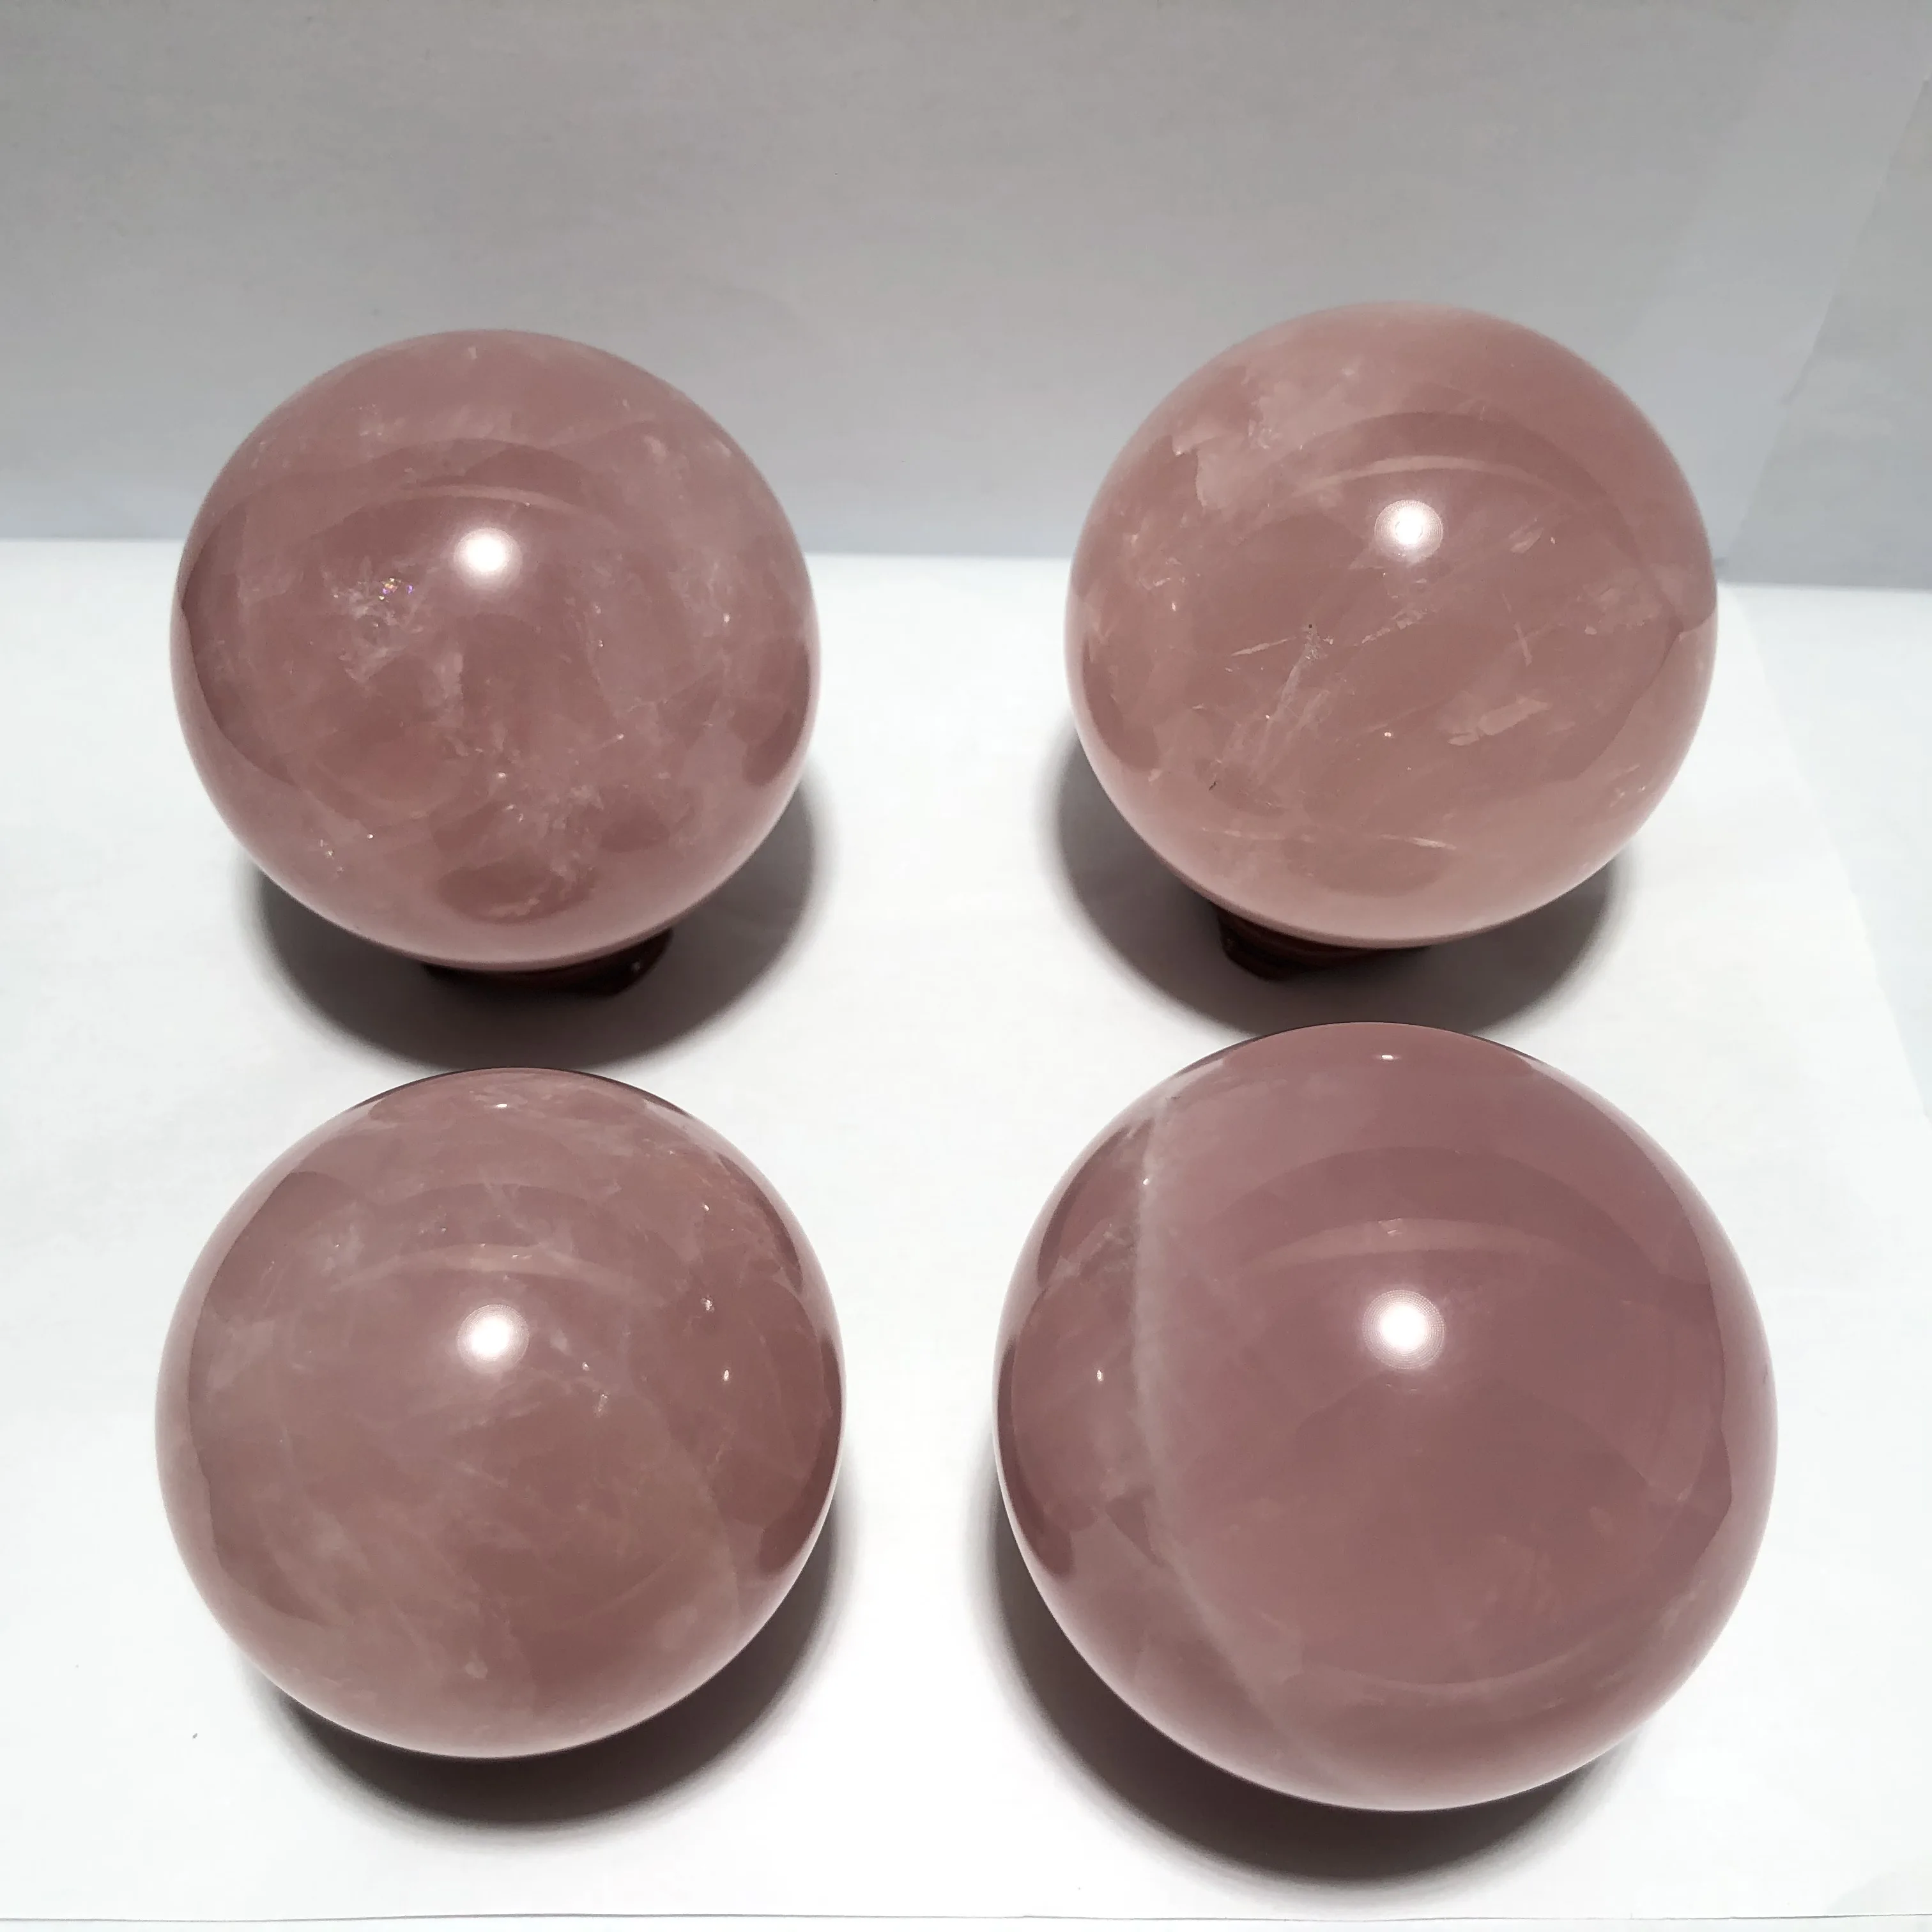 

Natural Rose Quartz Hand-Polished Sphere Feng Shui Reiki Healing Crystals Mineral Ball Home Decoration Handicraft Stone Spheres